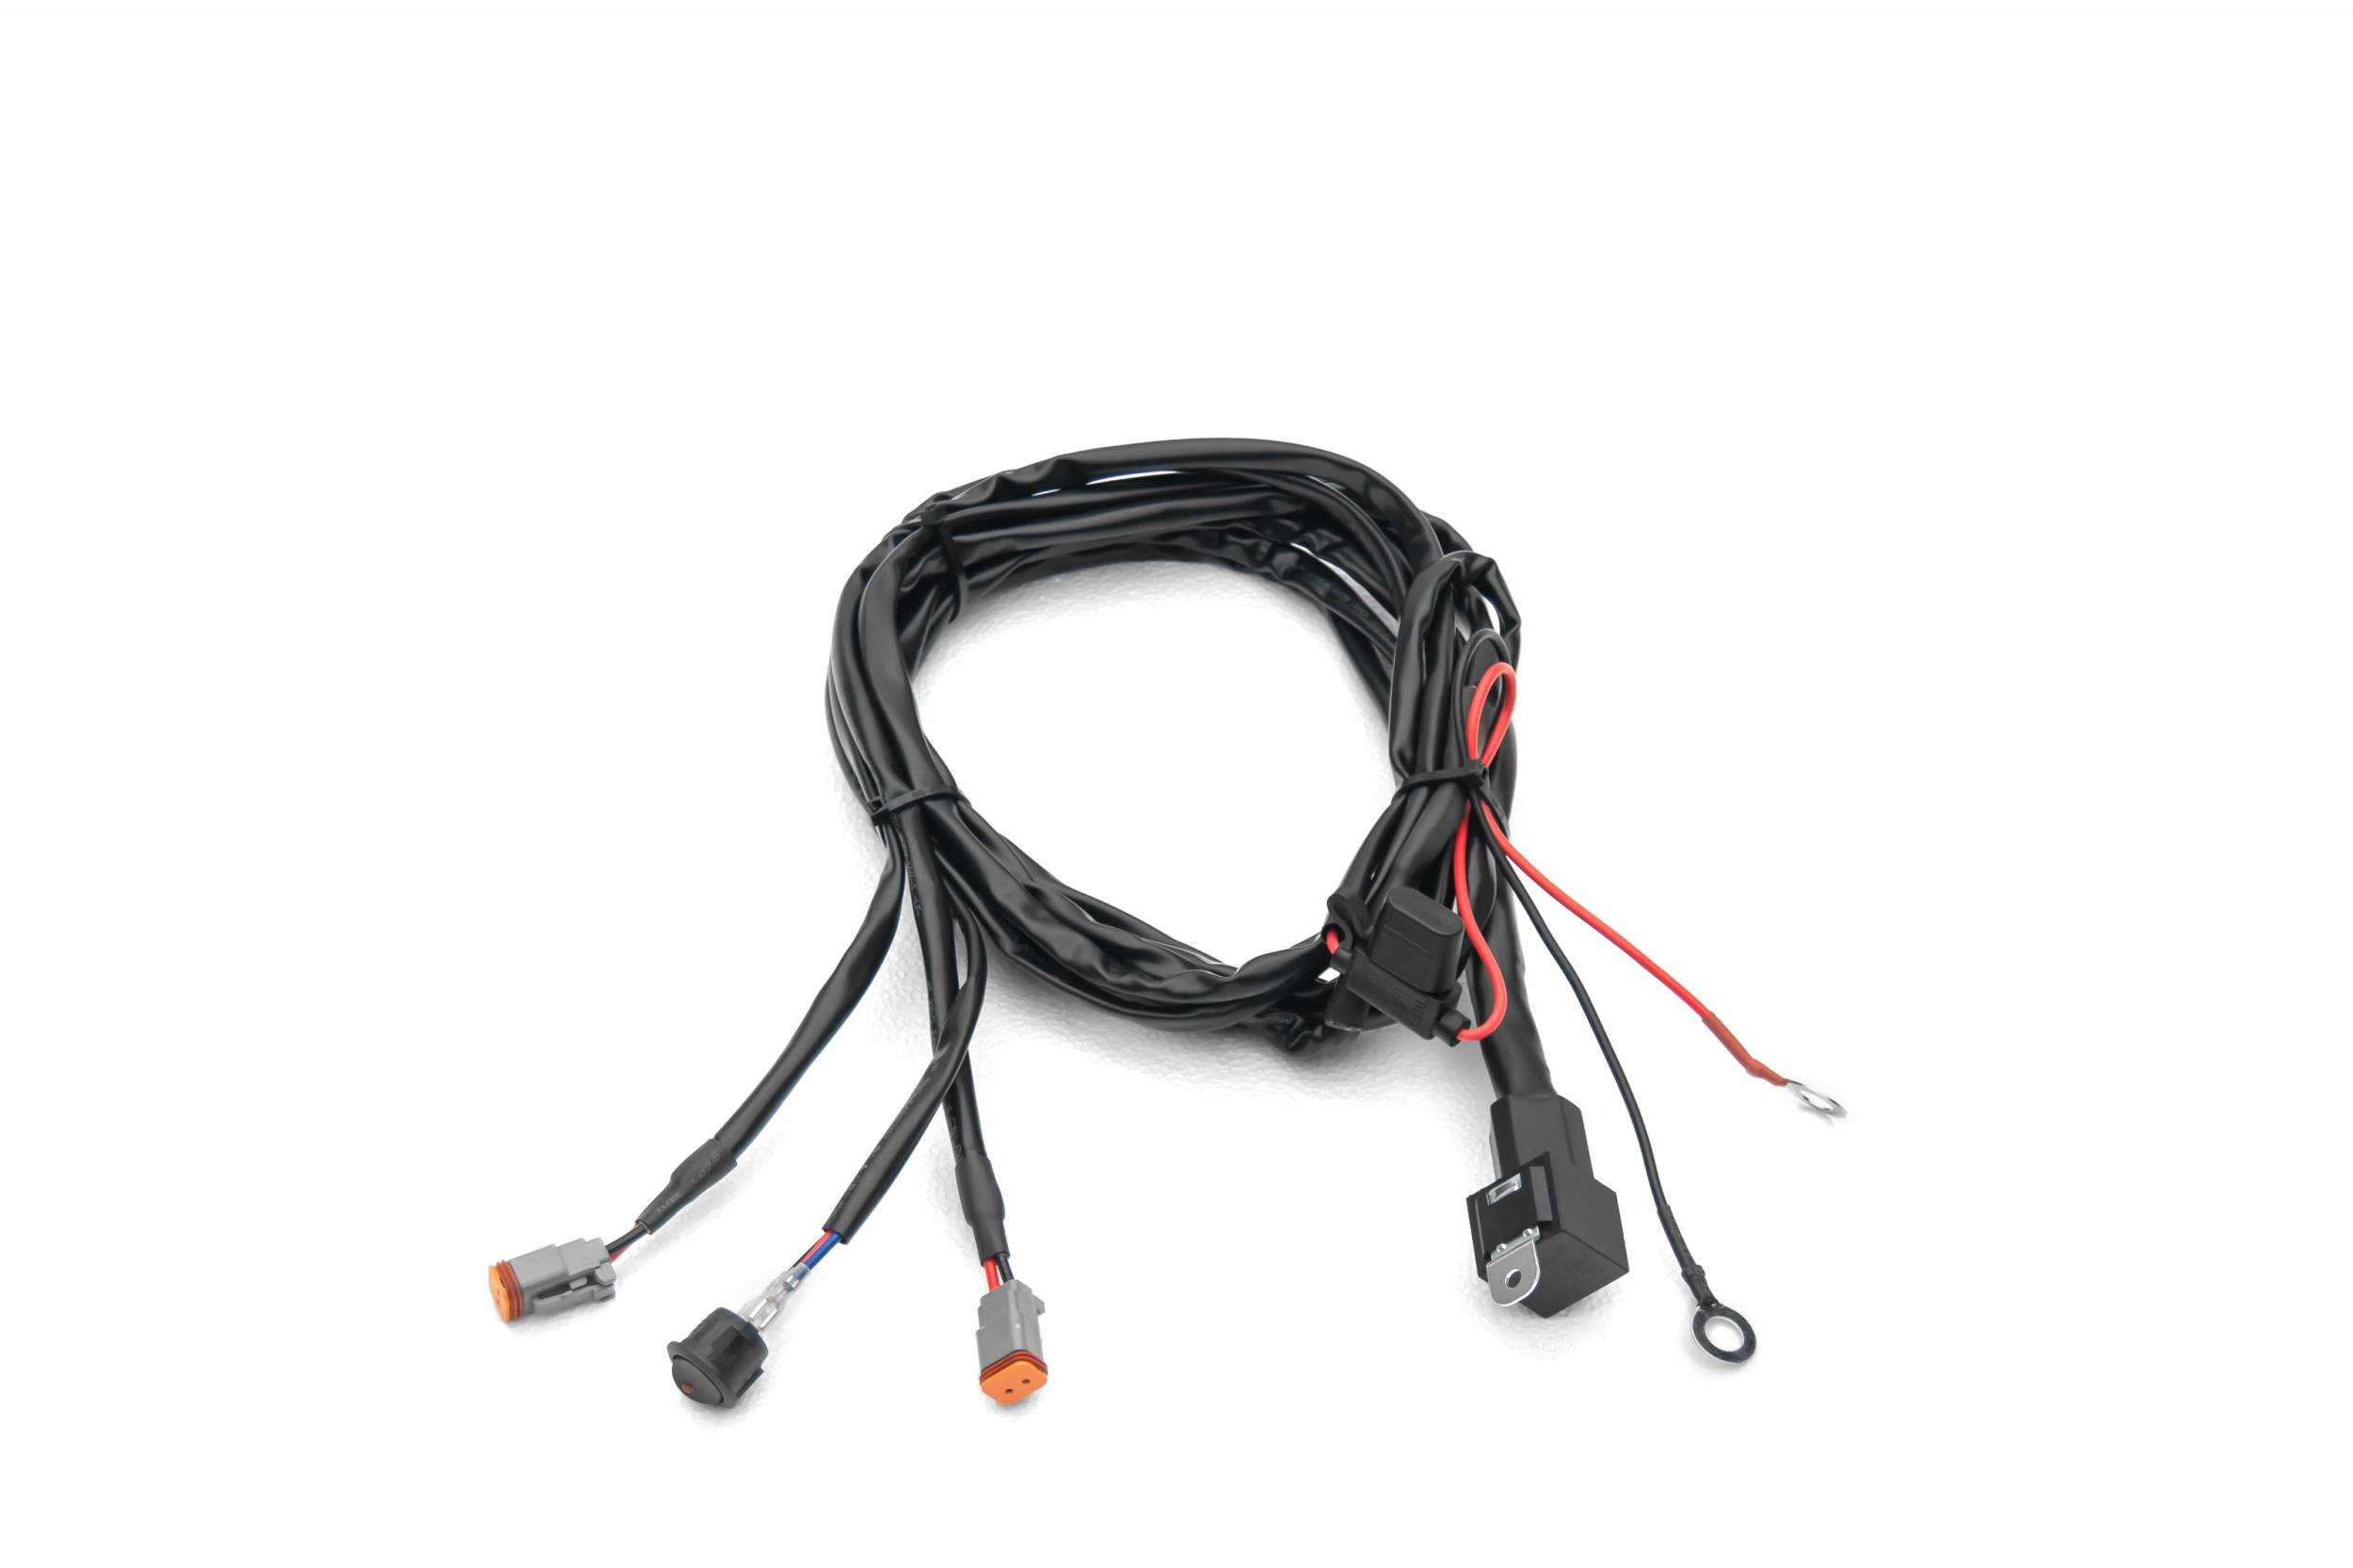 ZROADZ OFF ROAD PRODUCTS - Universal 25 FT DT Wiring Harness to connect 2 LED Light Bars, 200 Watt or below- PN #Z390020D-25A